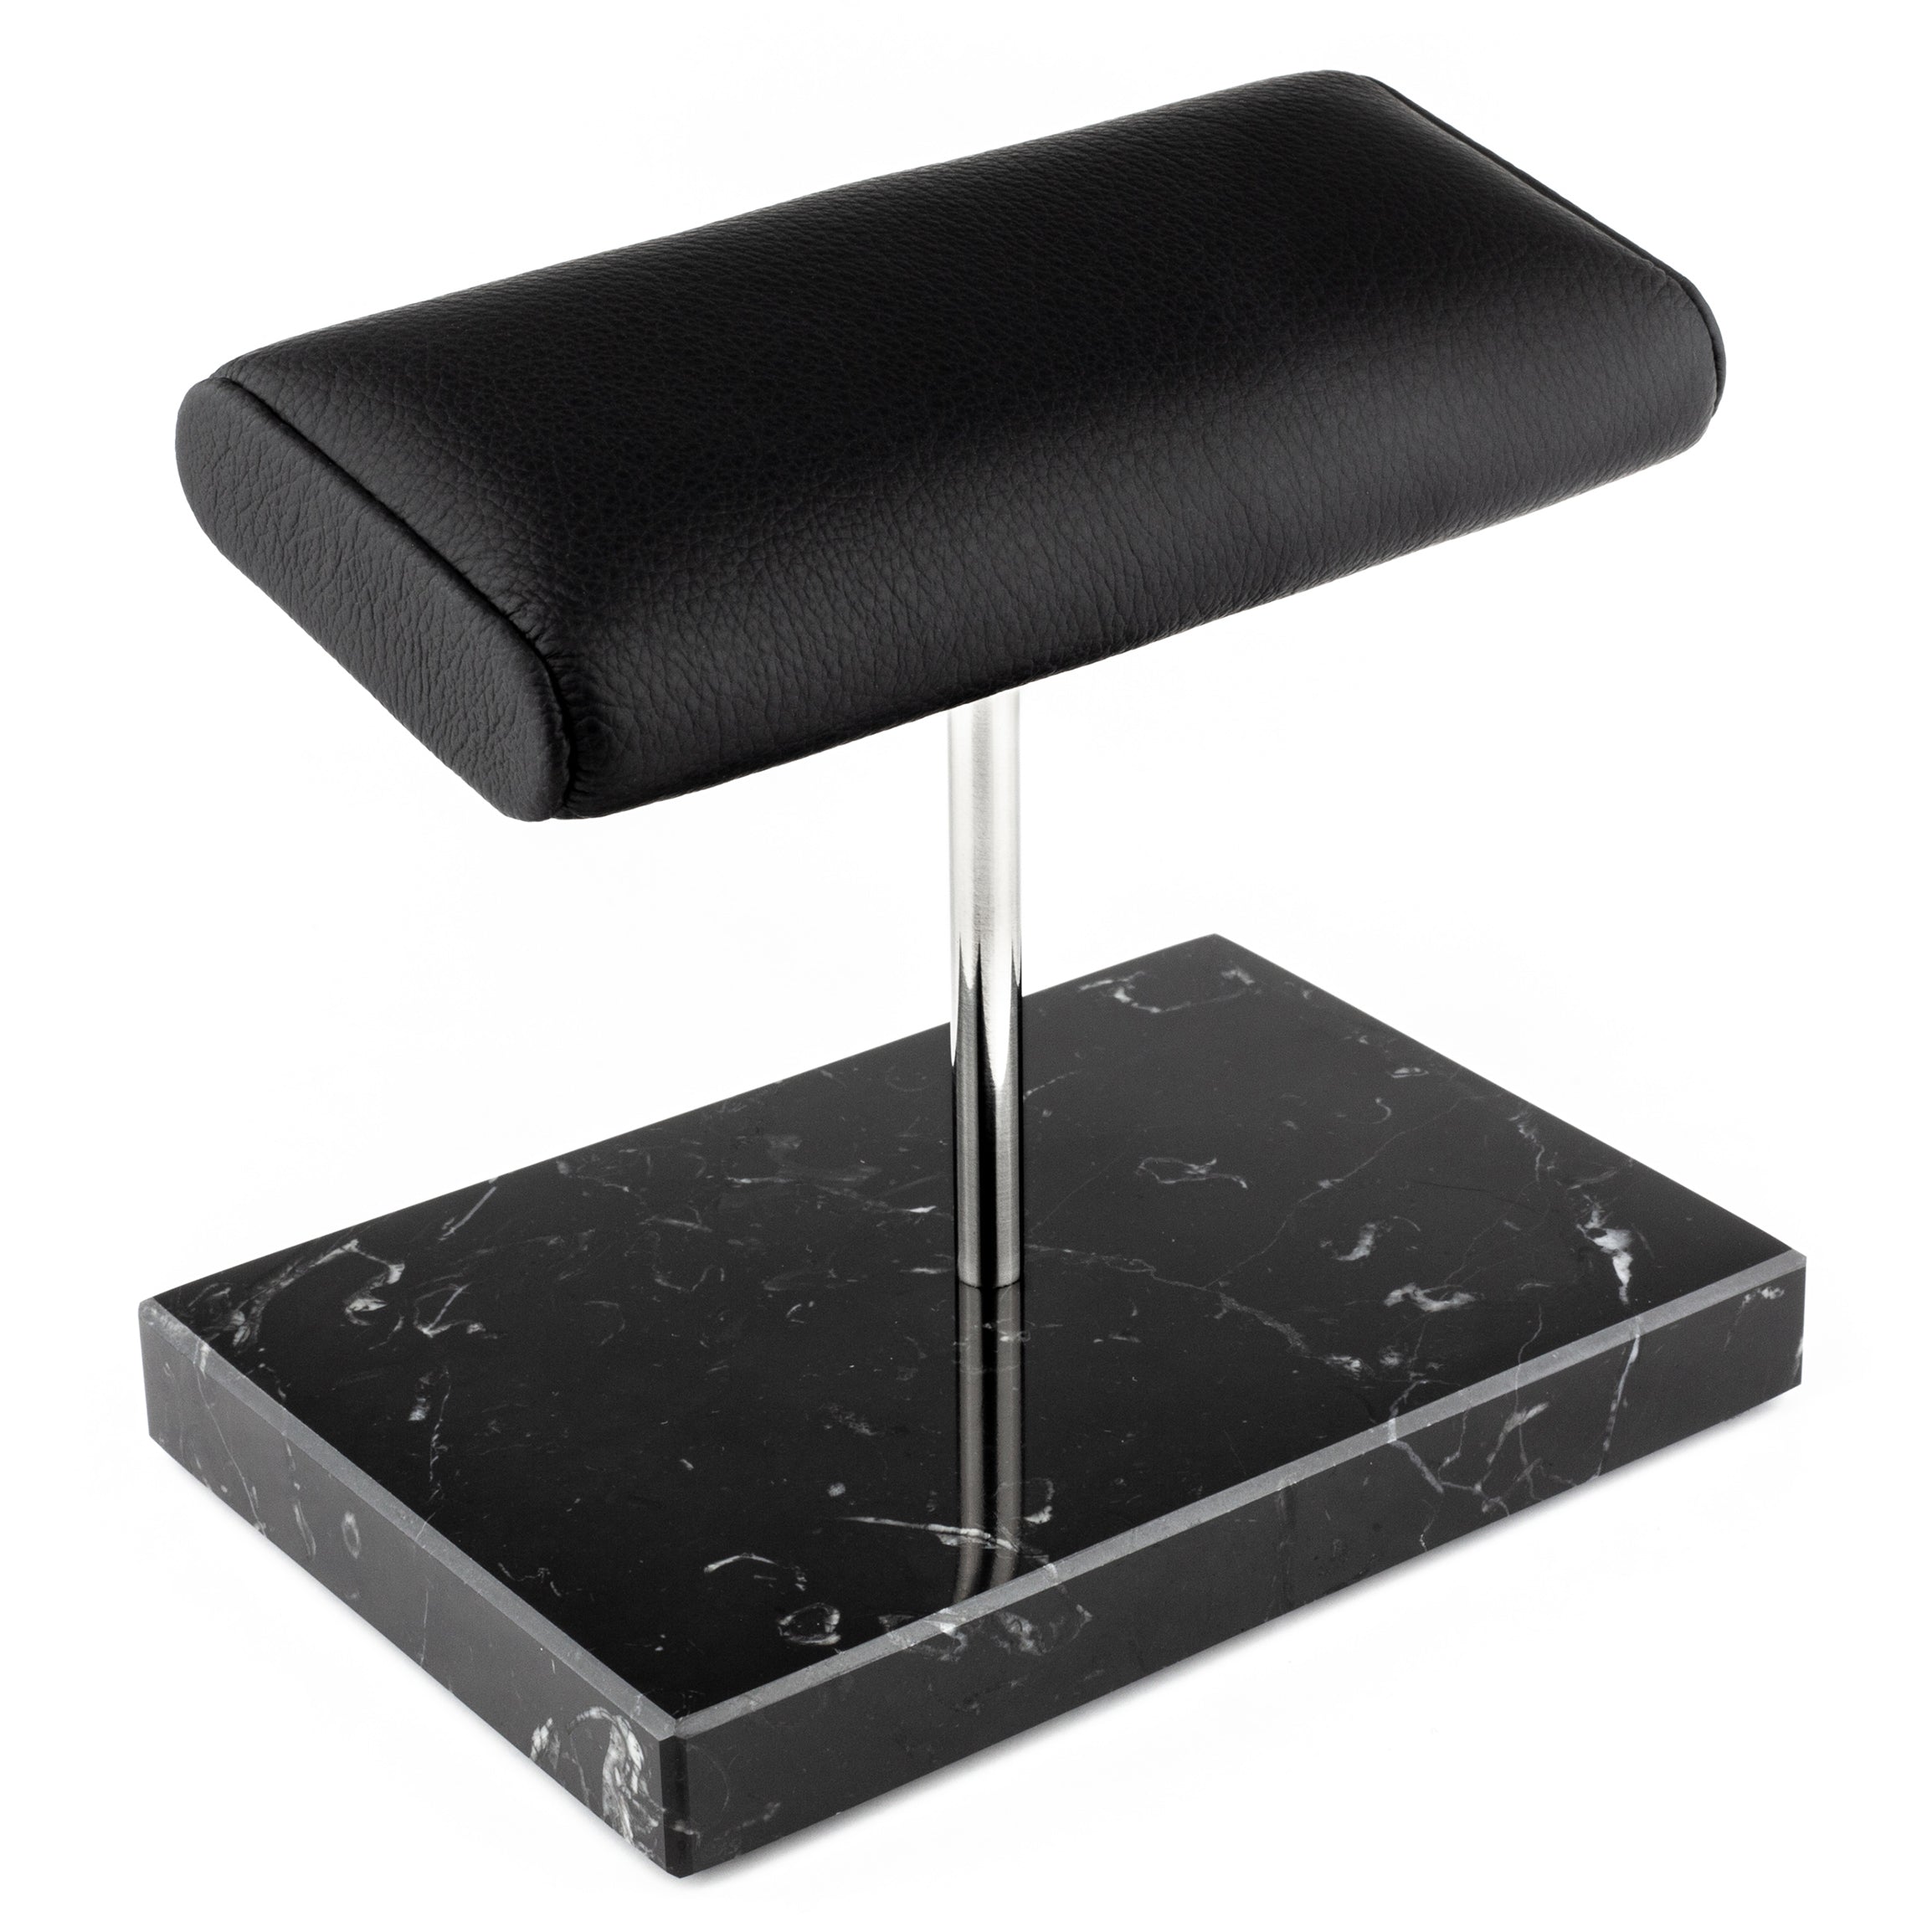 WATCH STAND CLASSIC - DOUBLE - BLACK & SILVER